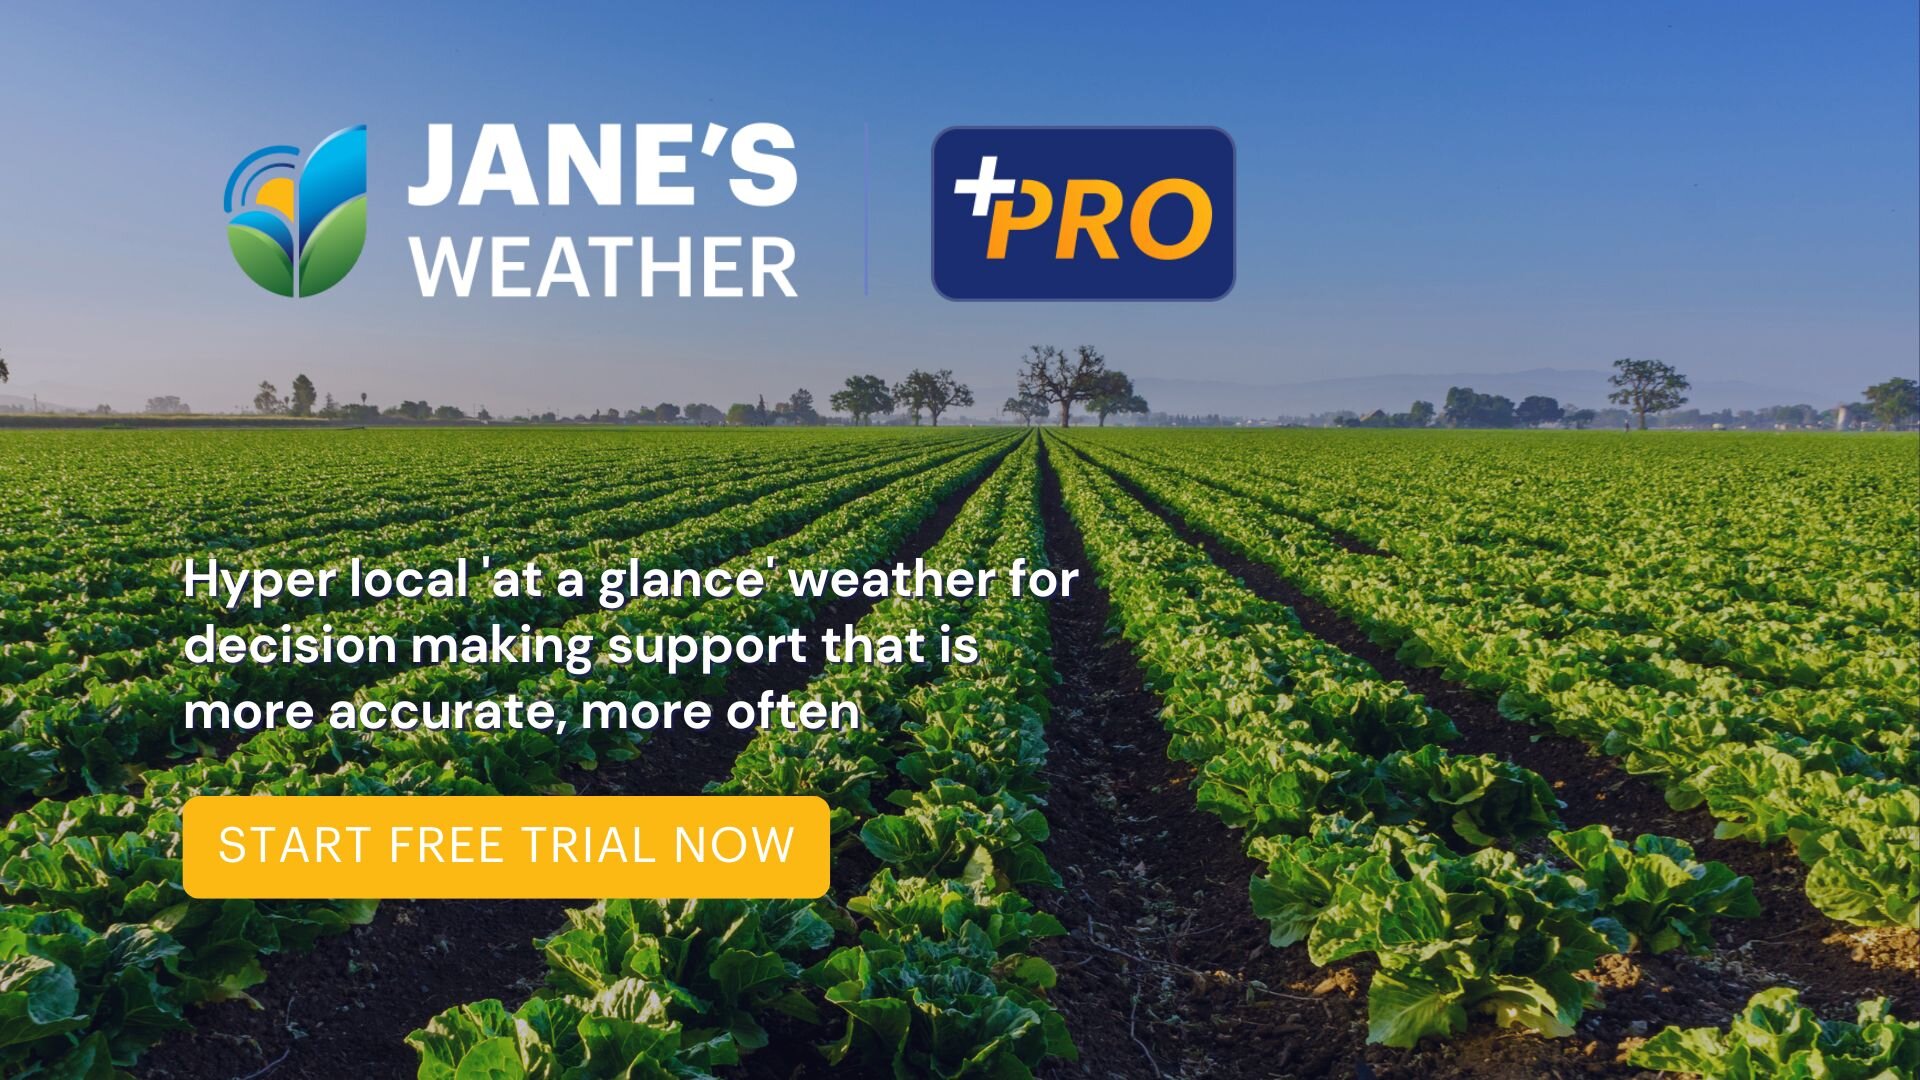 Jane's Weather PRO - begin free trial now